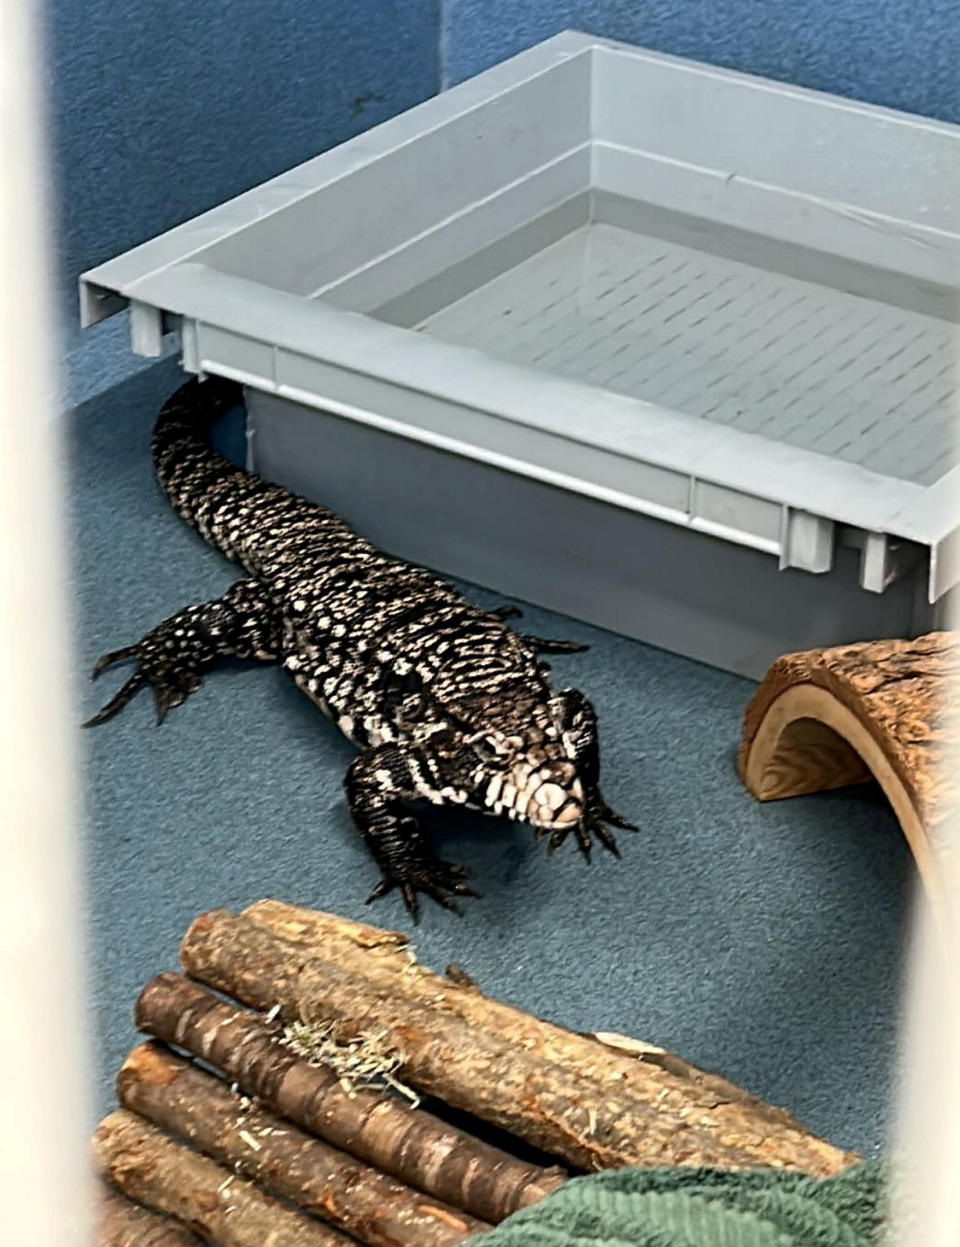 At nearly 3ft long, the lizard is the largest reptile in the GSPCA's care. (SWNS)